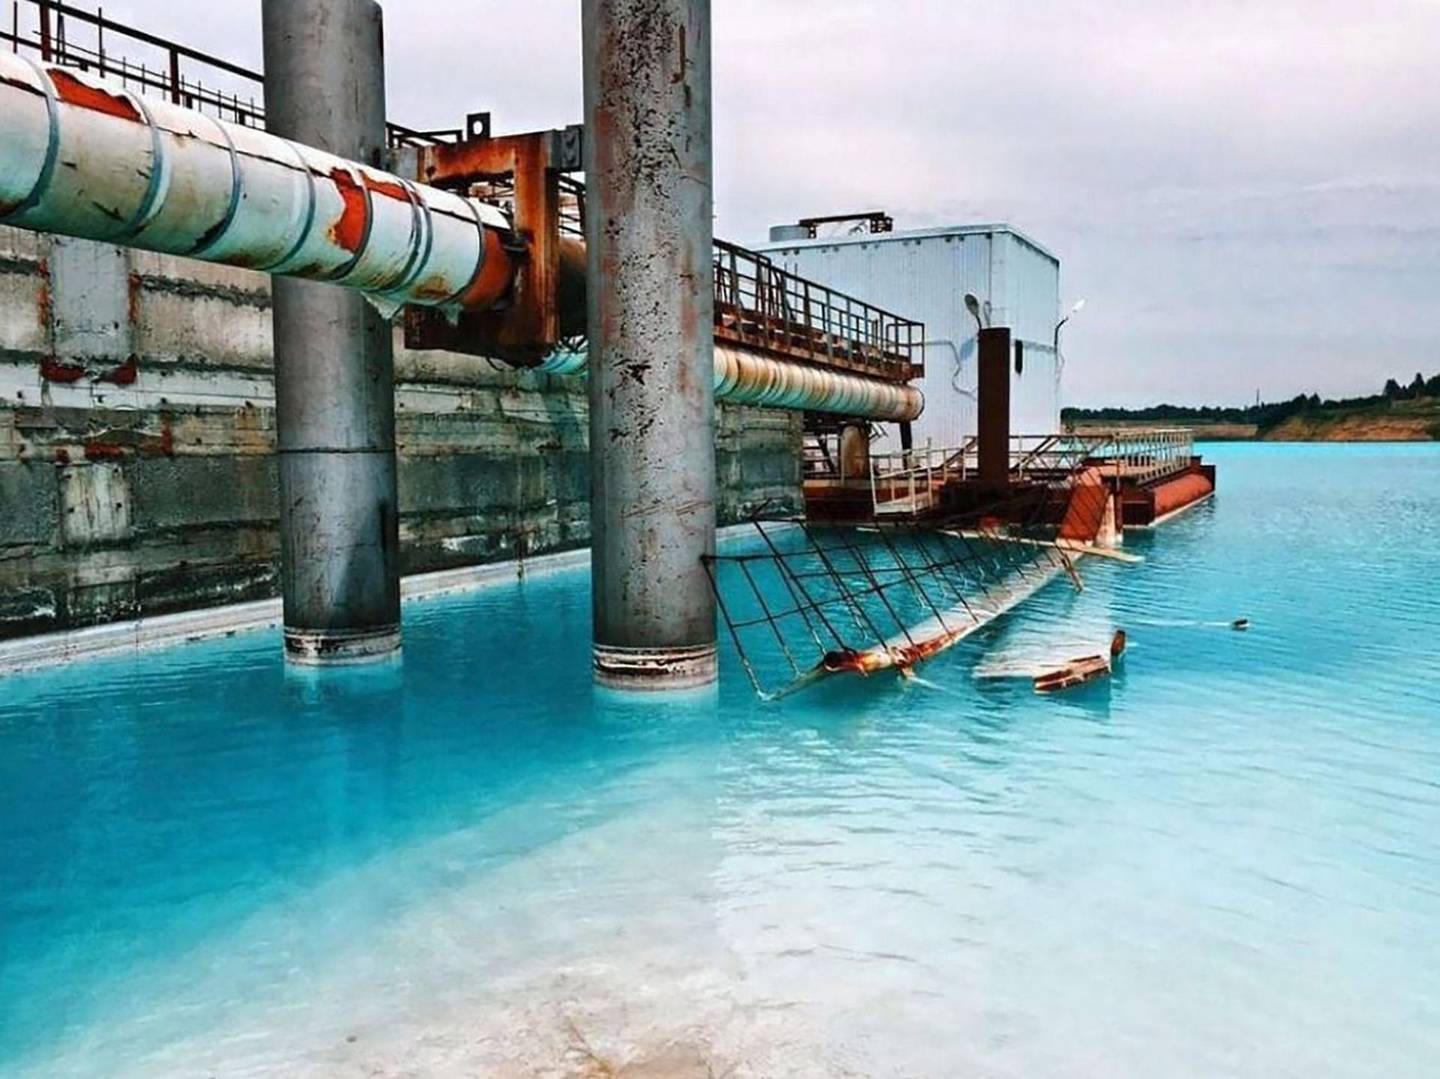 chemical blue lagoon in Russia. Social media